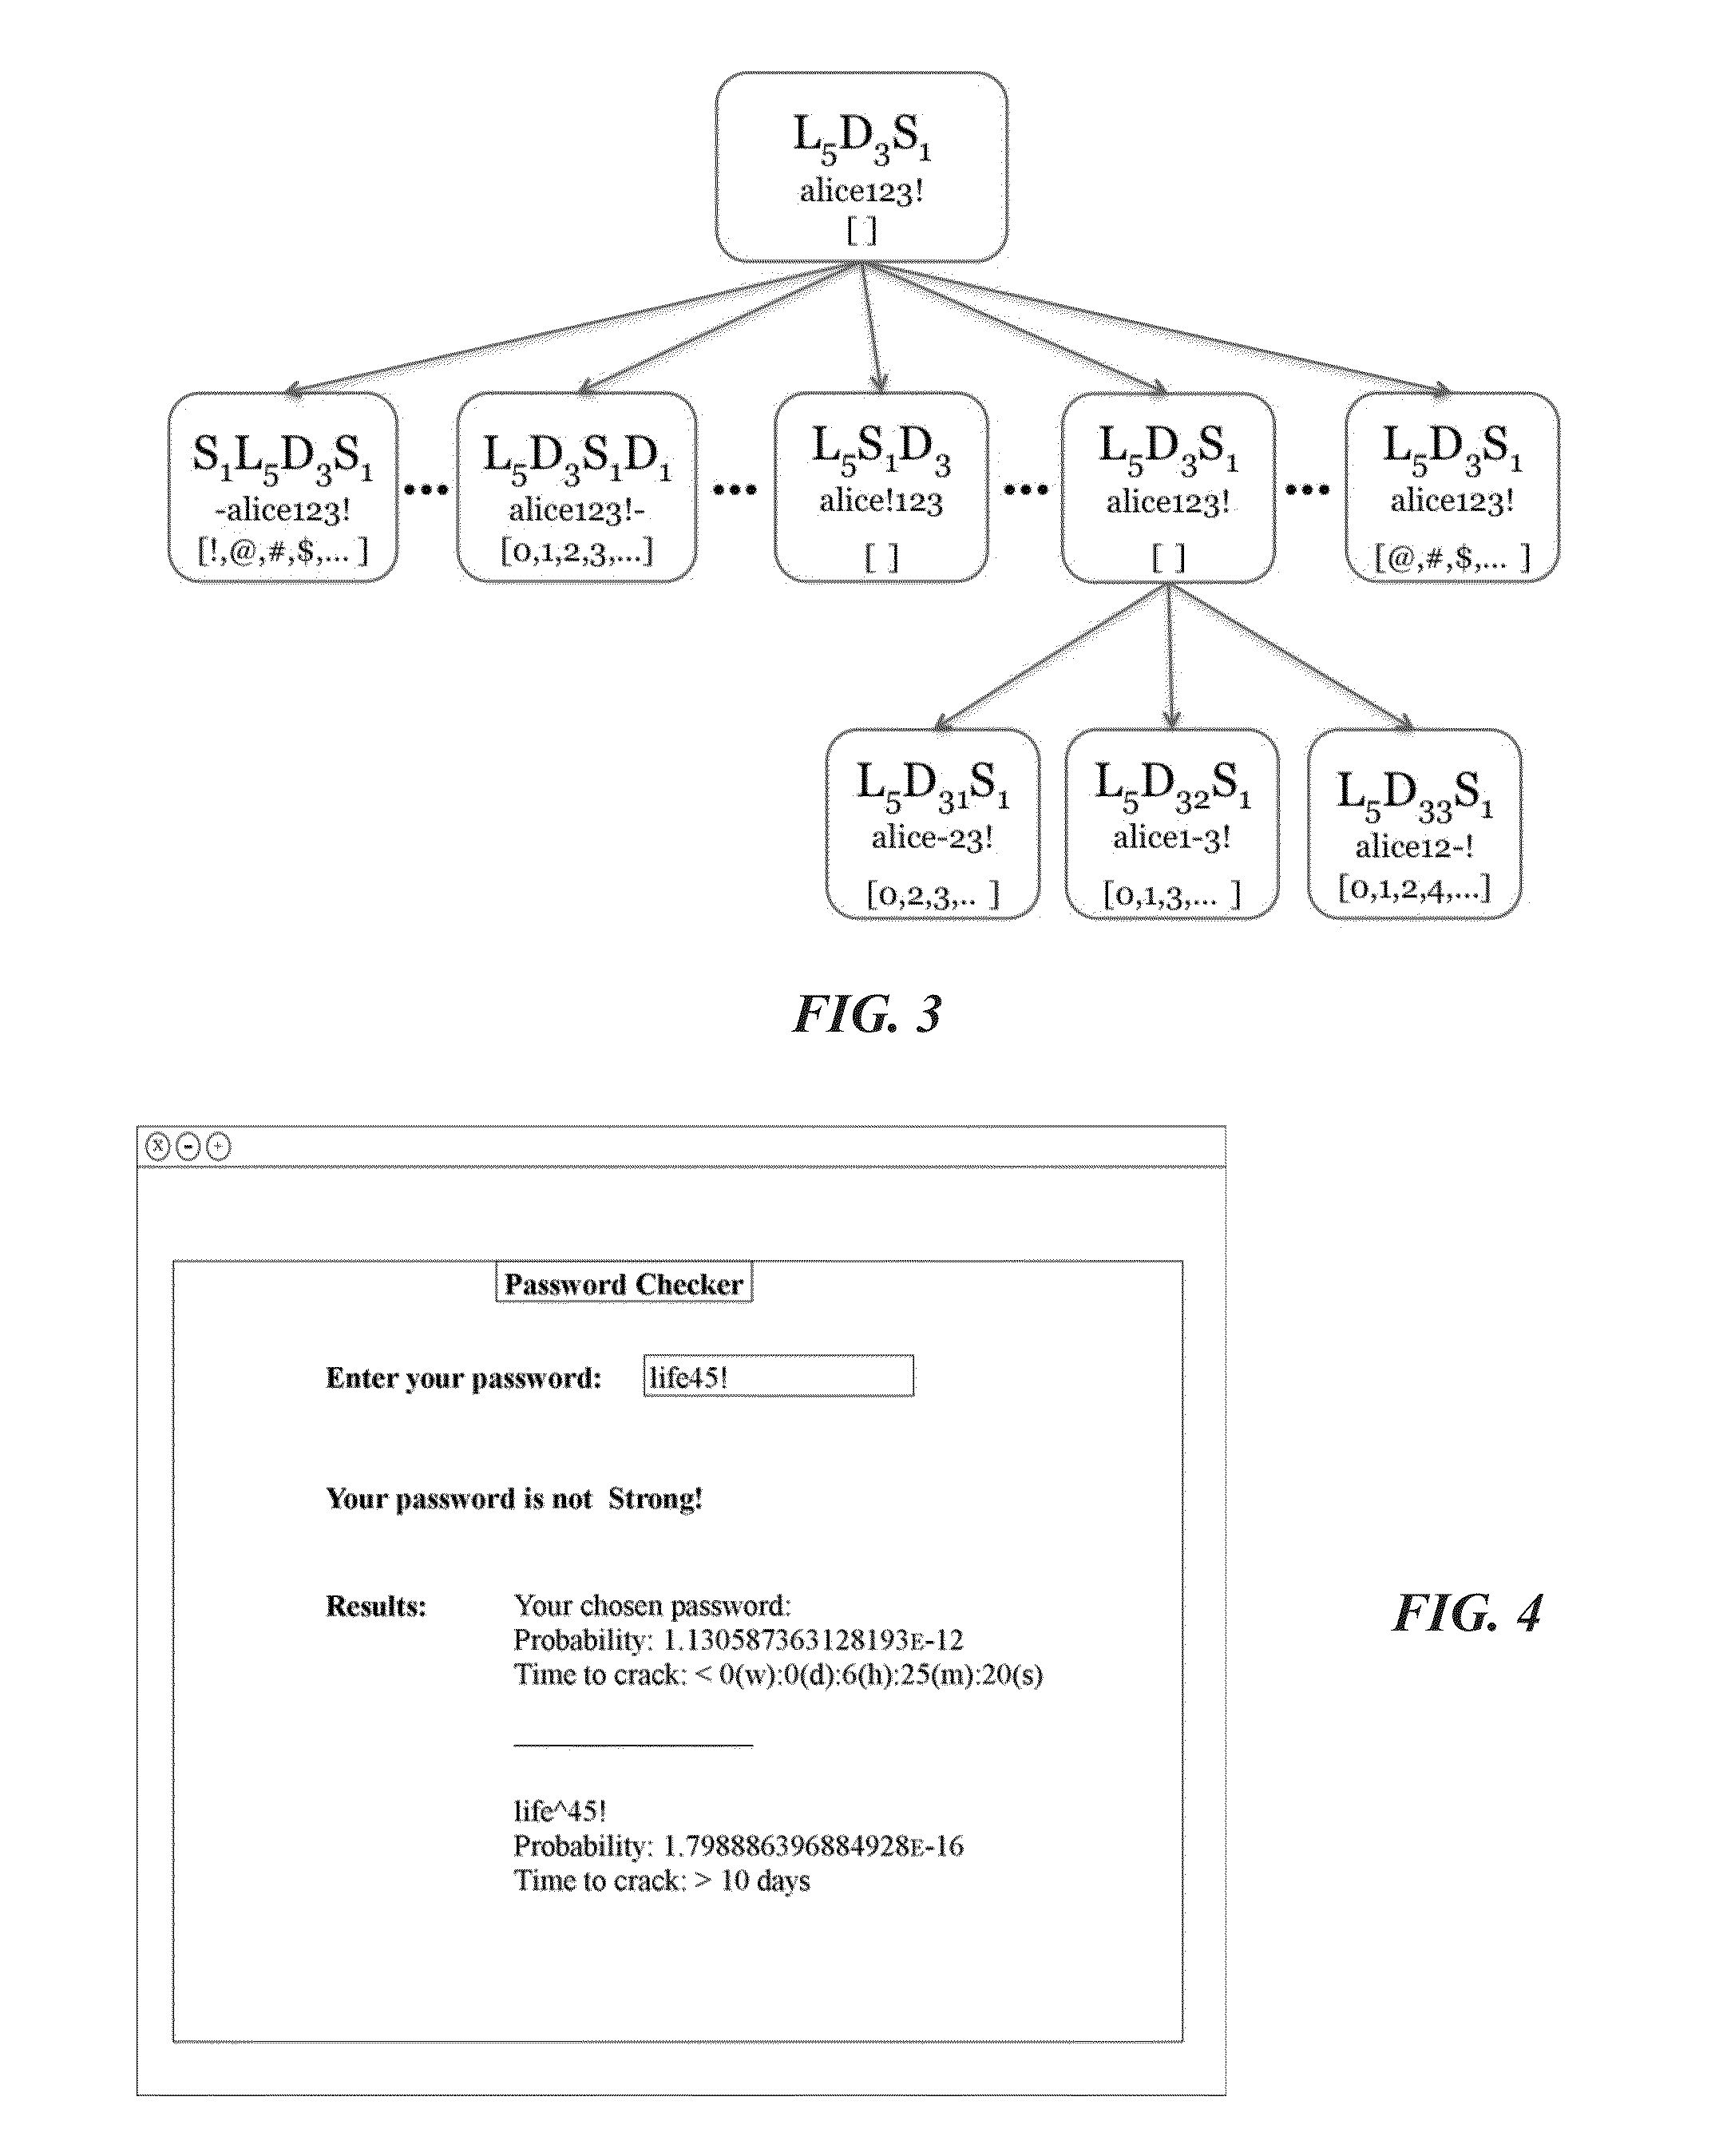 System and methods for analyzing and modifying passwords